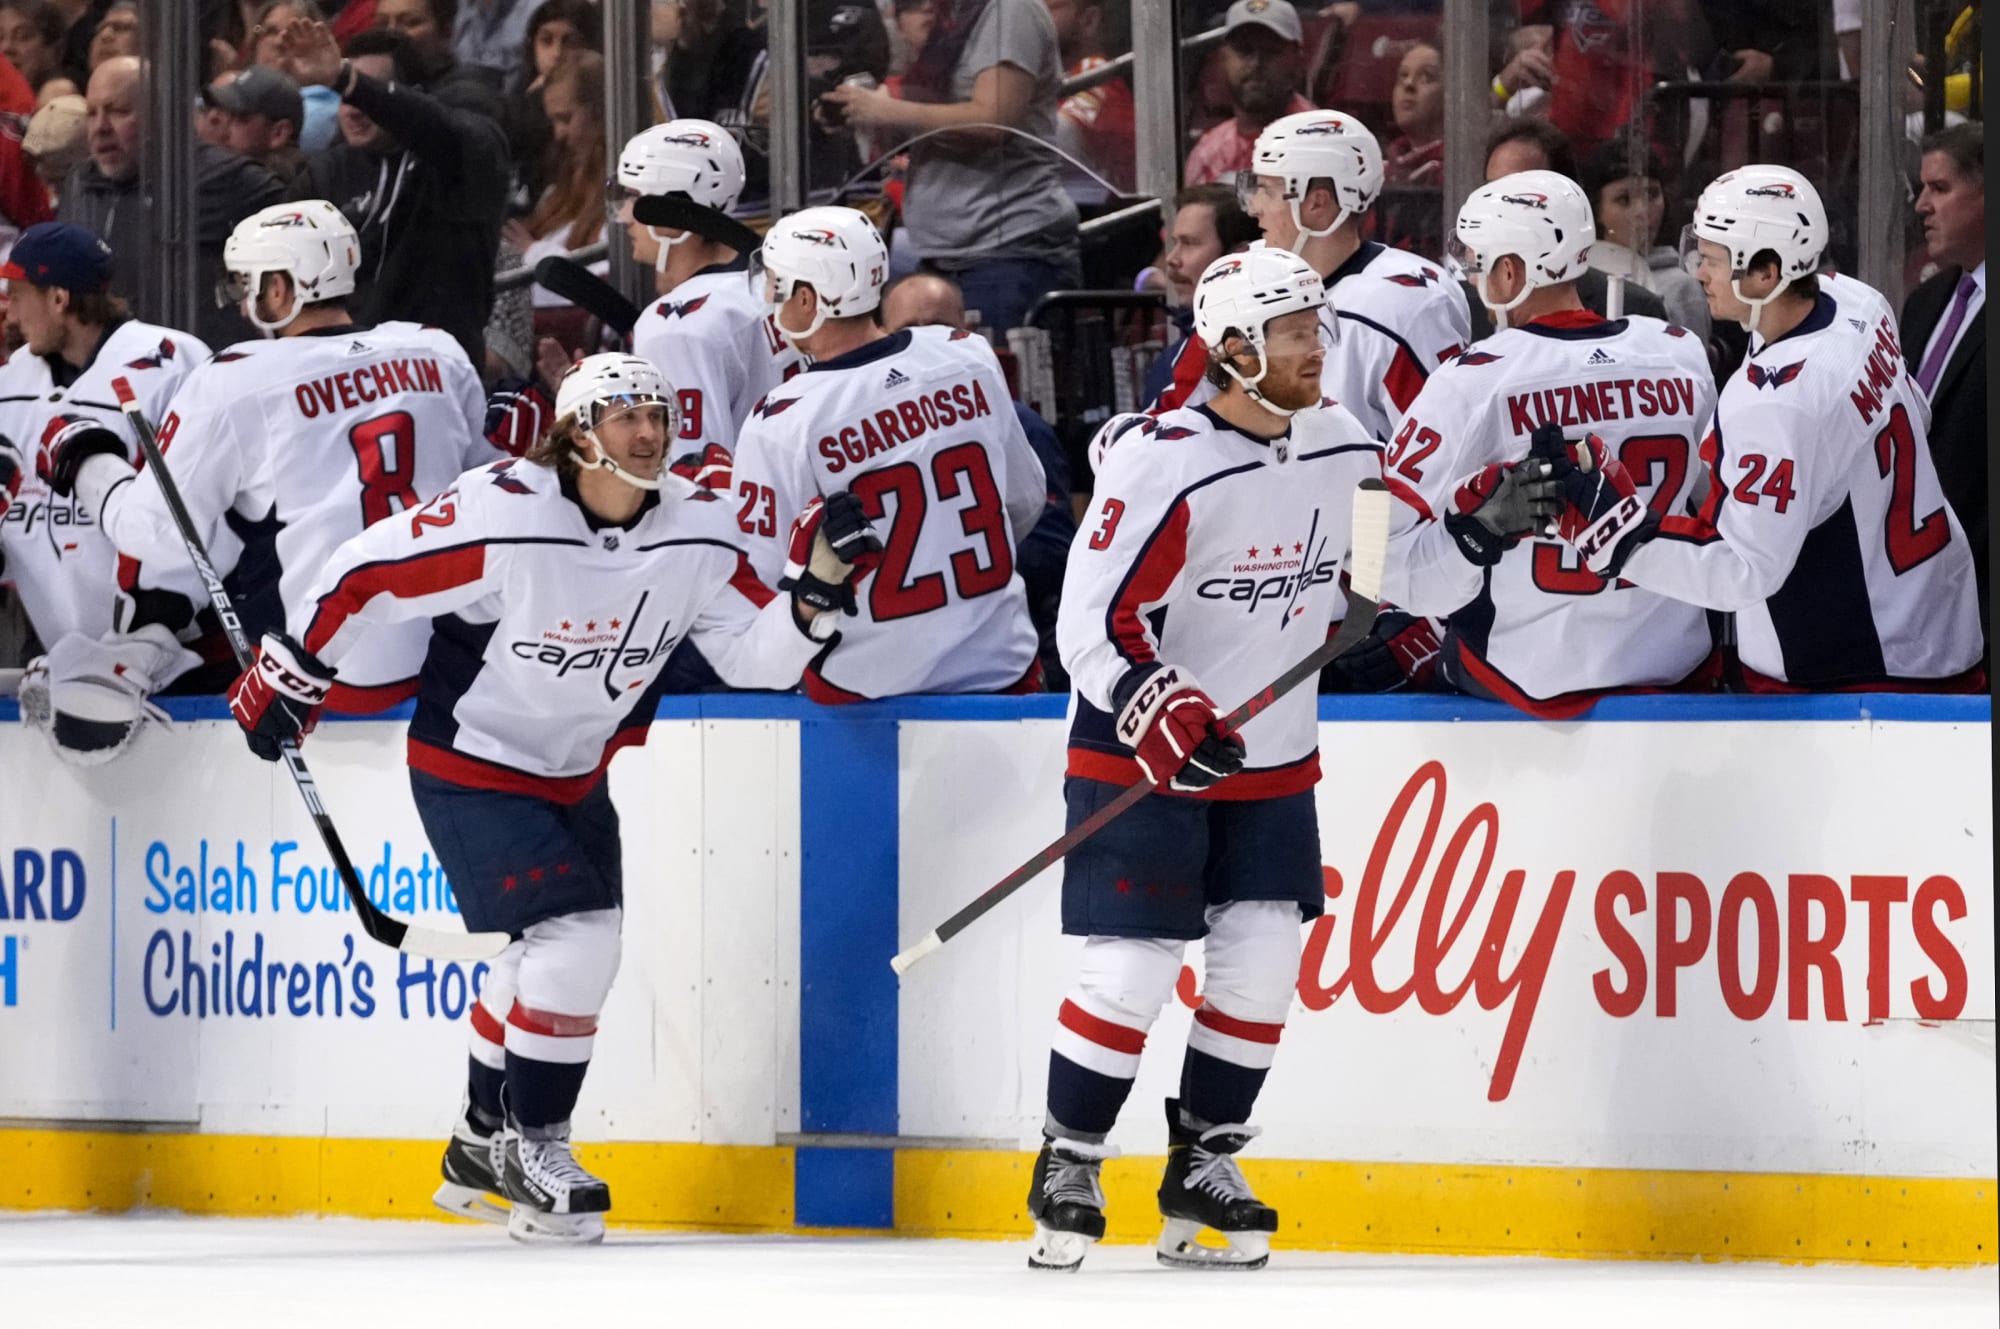 Washington Capitals Playoffs Final Predictions for series against Panthers